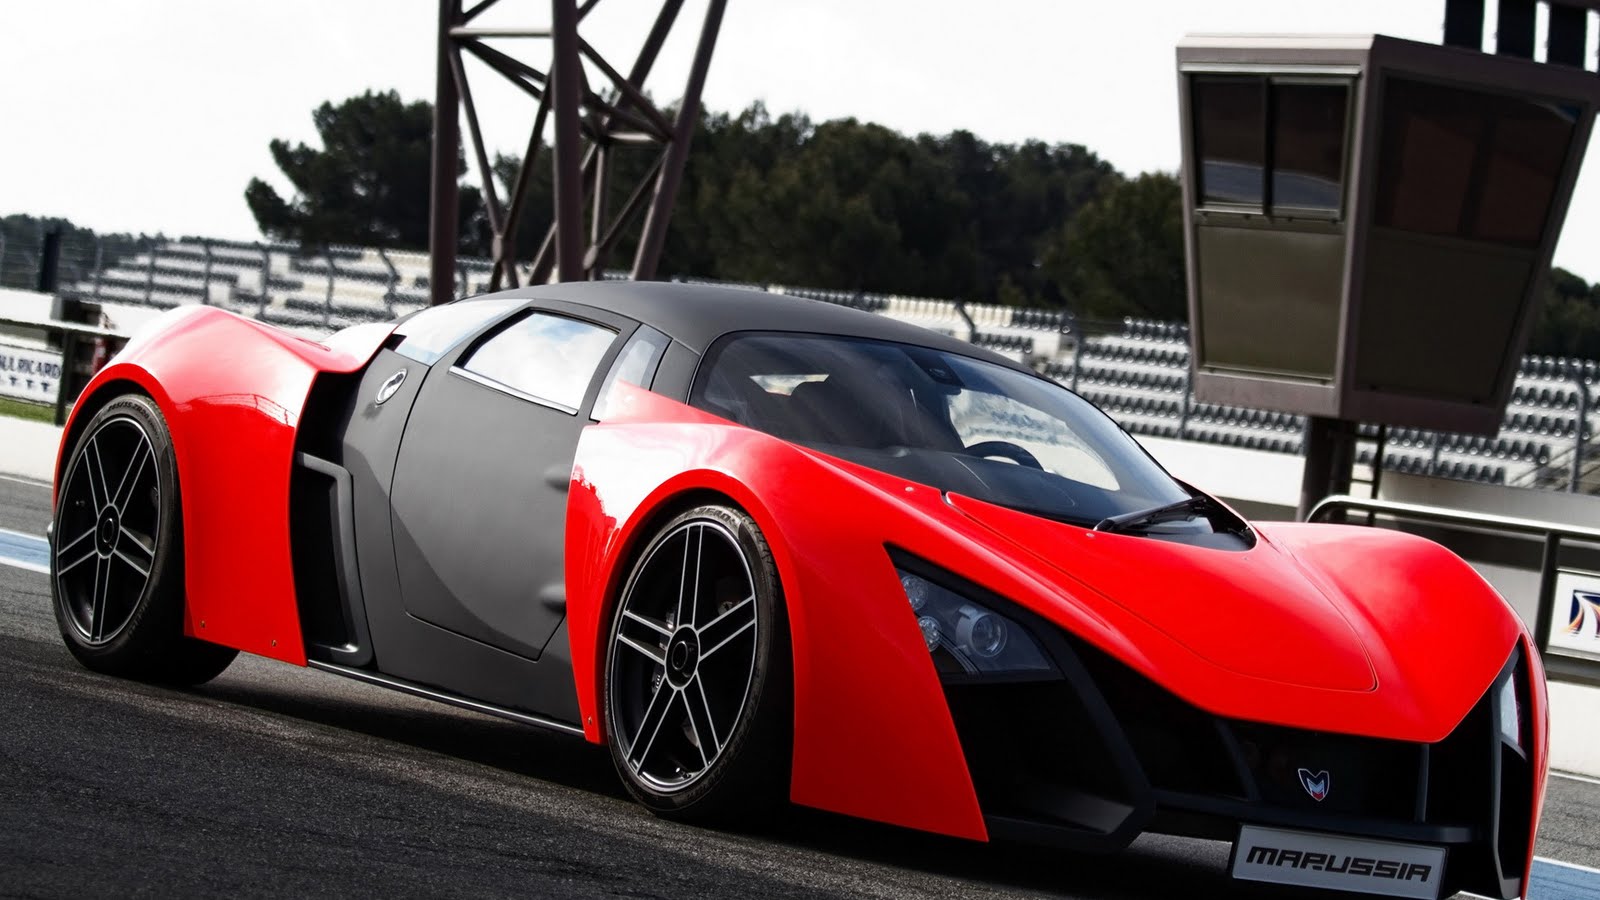 Marussia Red Luxury Supercar HD Wallpaper The Database